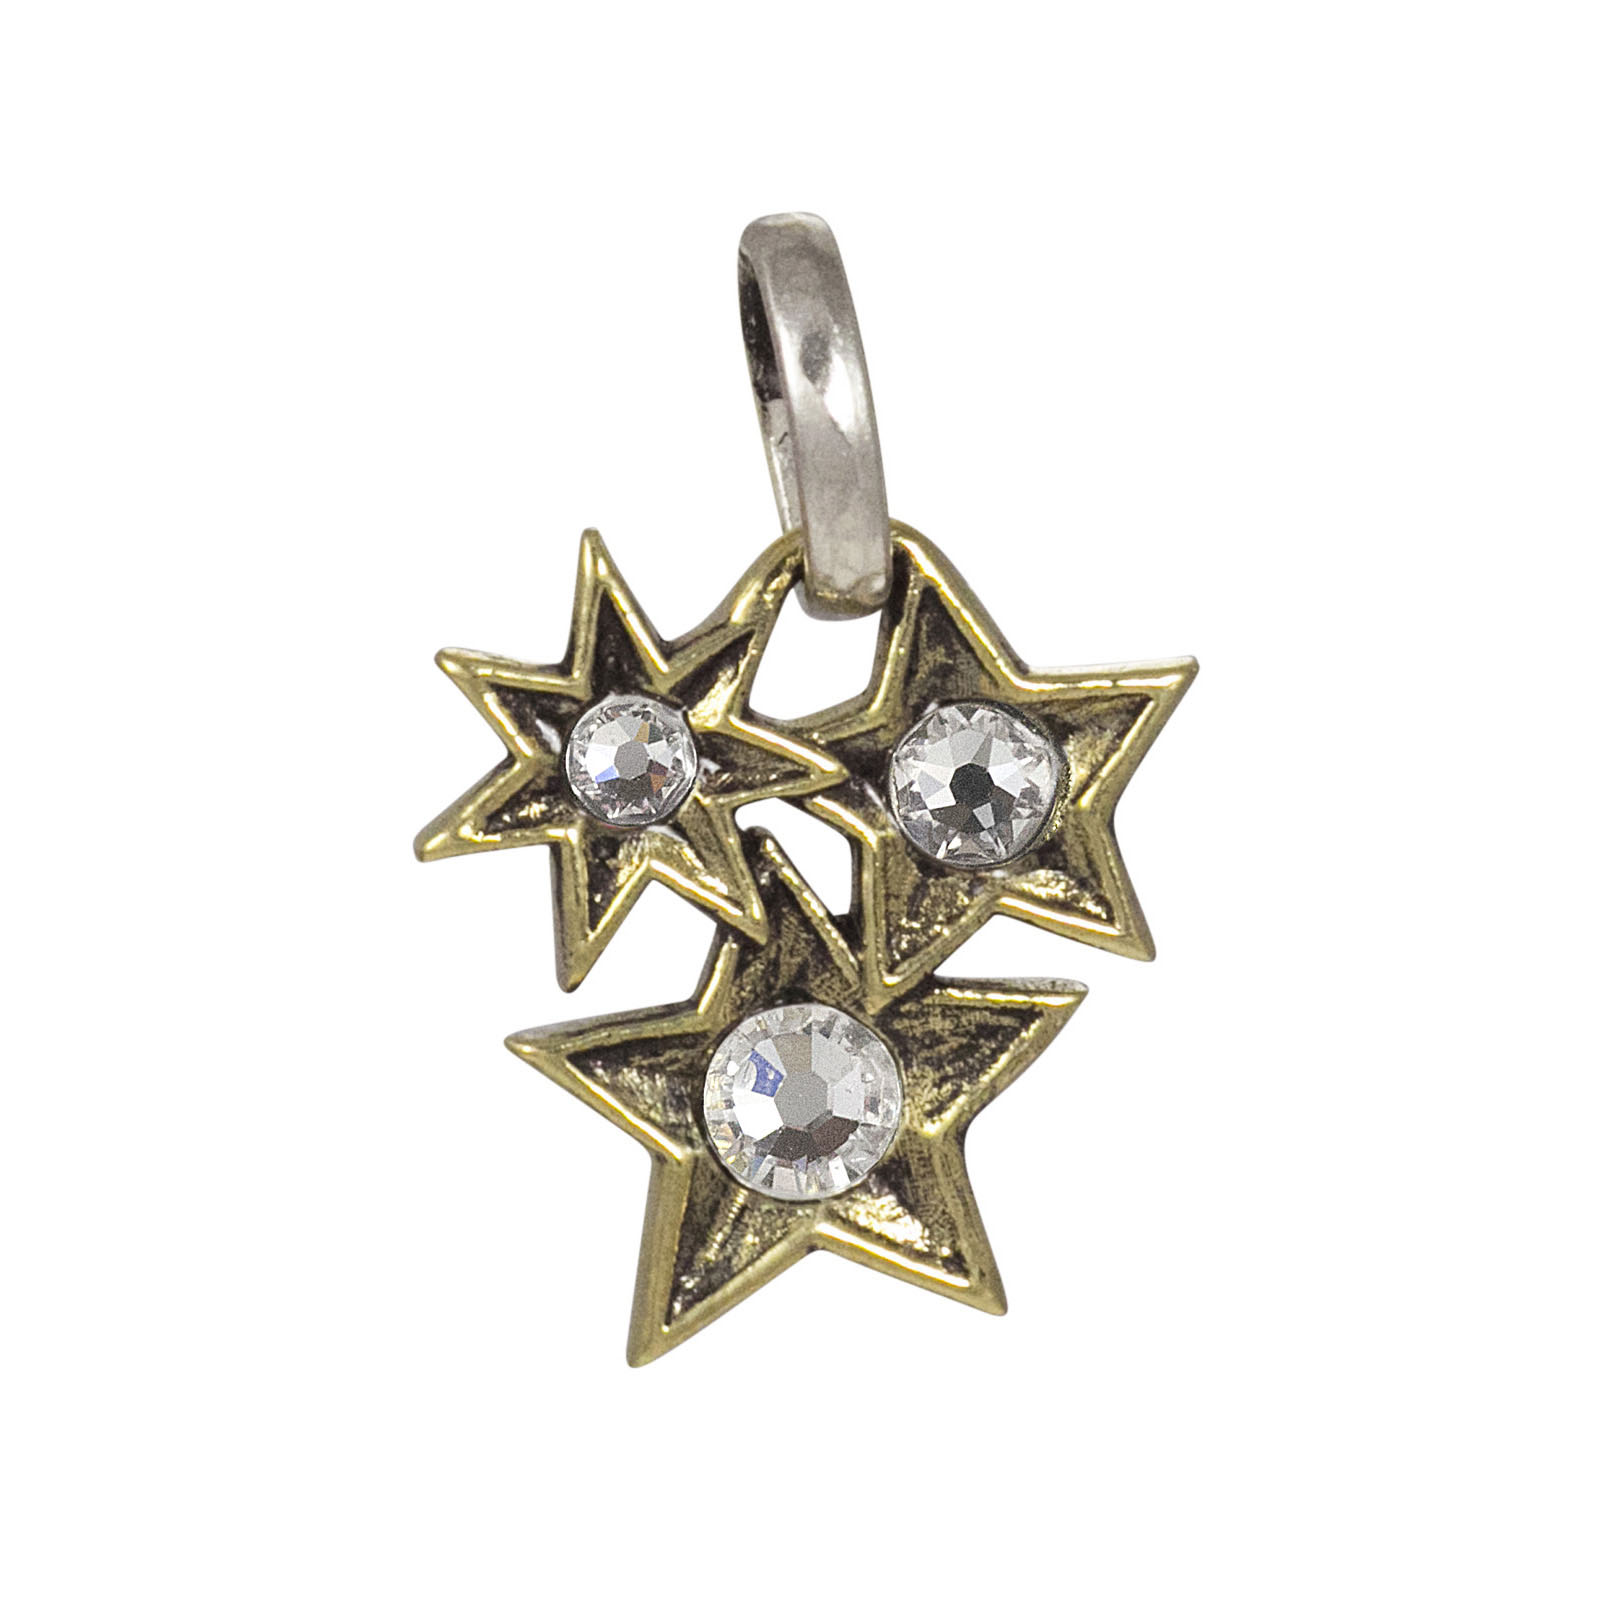 Waxing Poetic Starlight Cluster Pendant - Brass, Sterling Silver and CZ